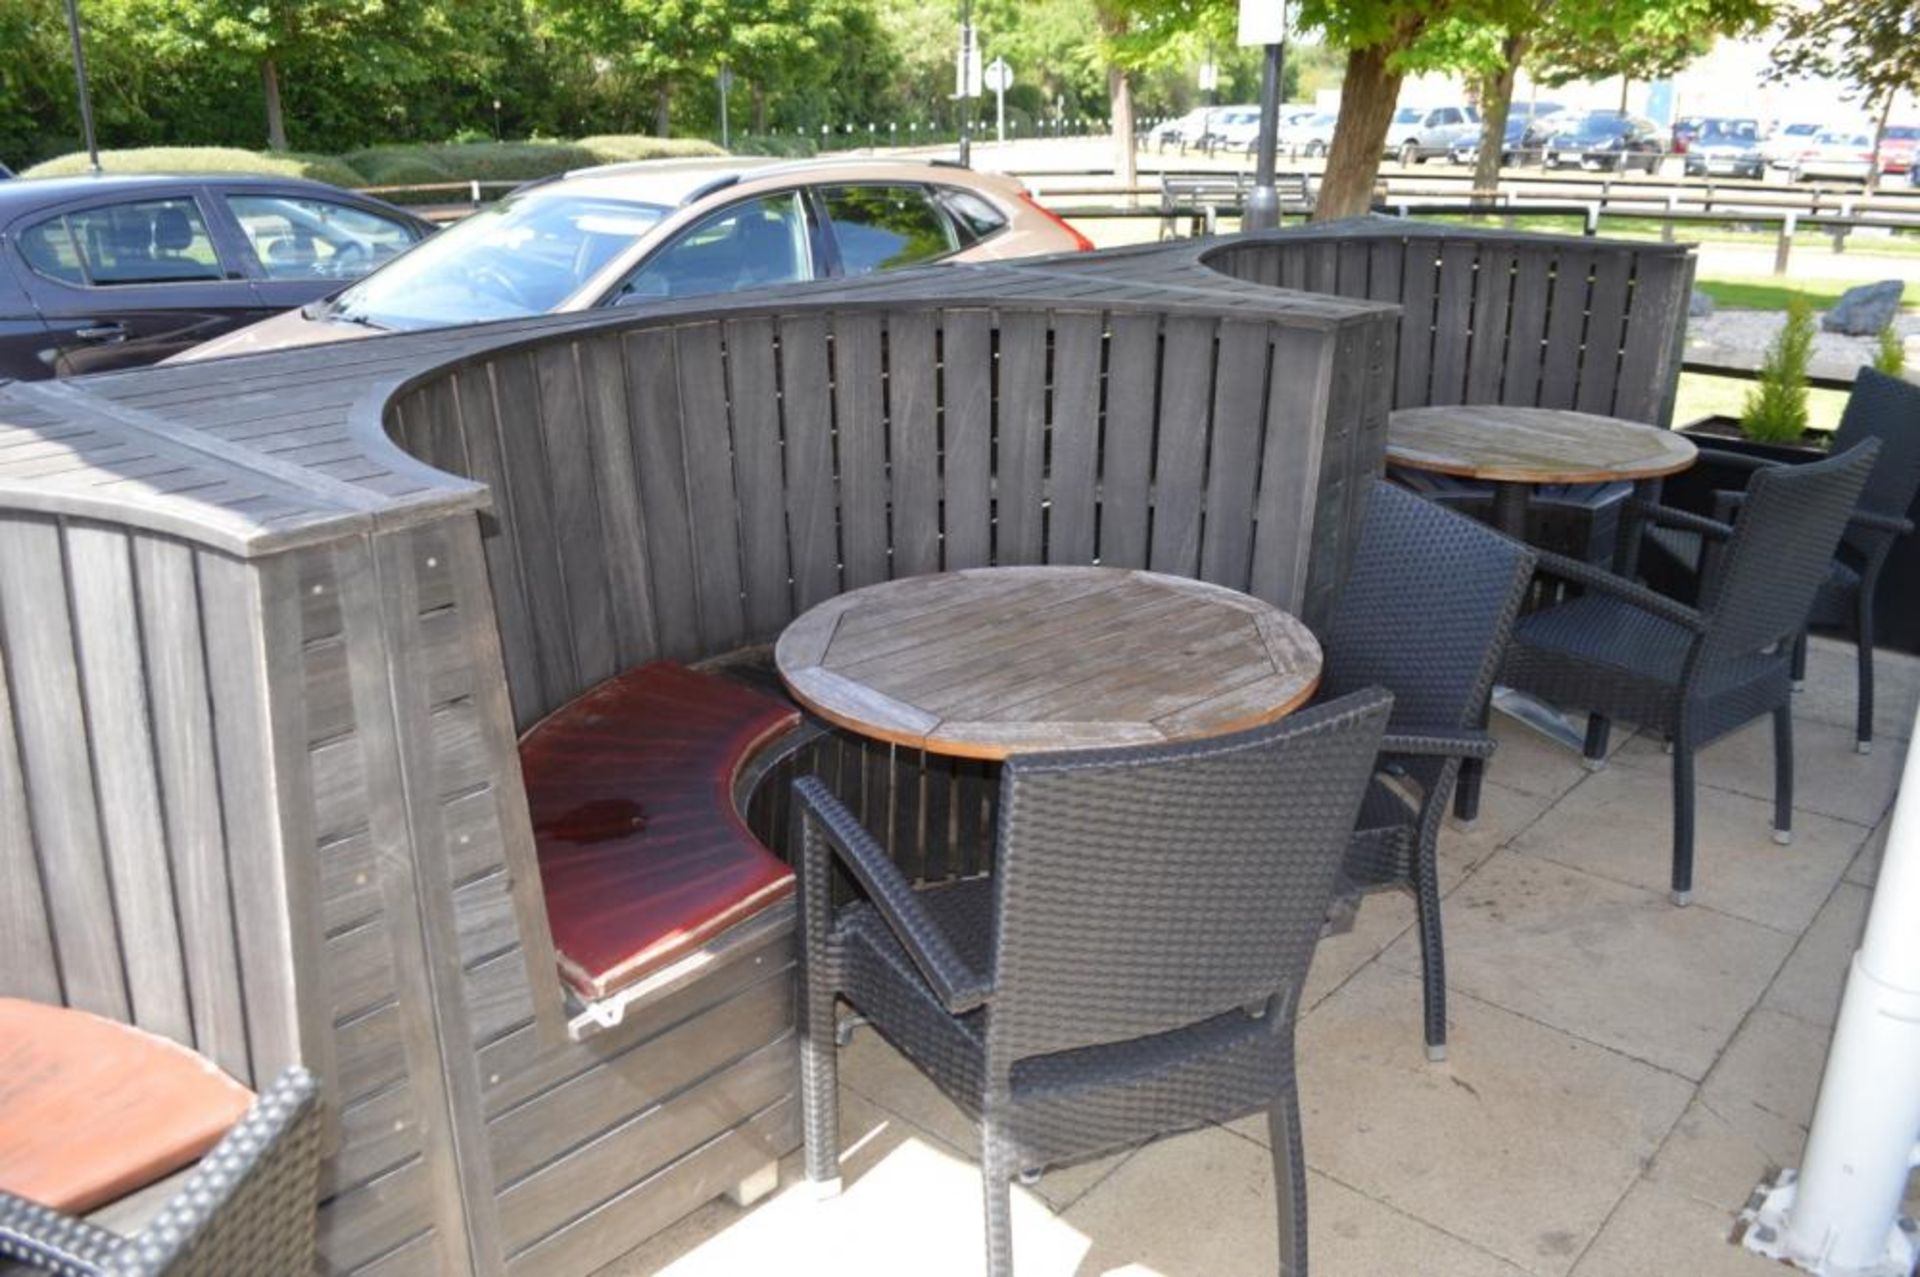 2 x Wooden Outdoor Seating Booths - Each Measure H111 x W203 x D106 cms - CL390 - Location: - Image 6 of 9